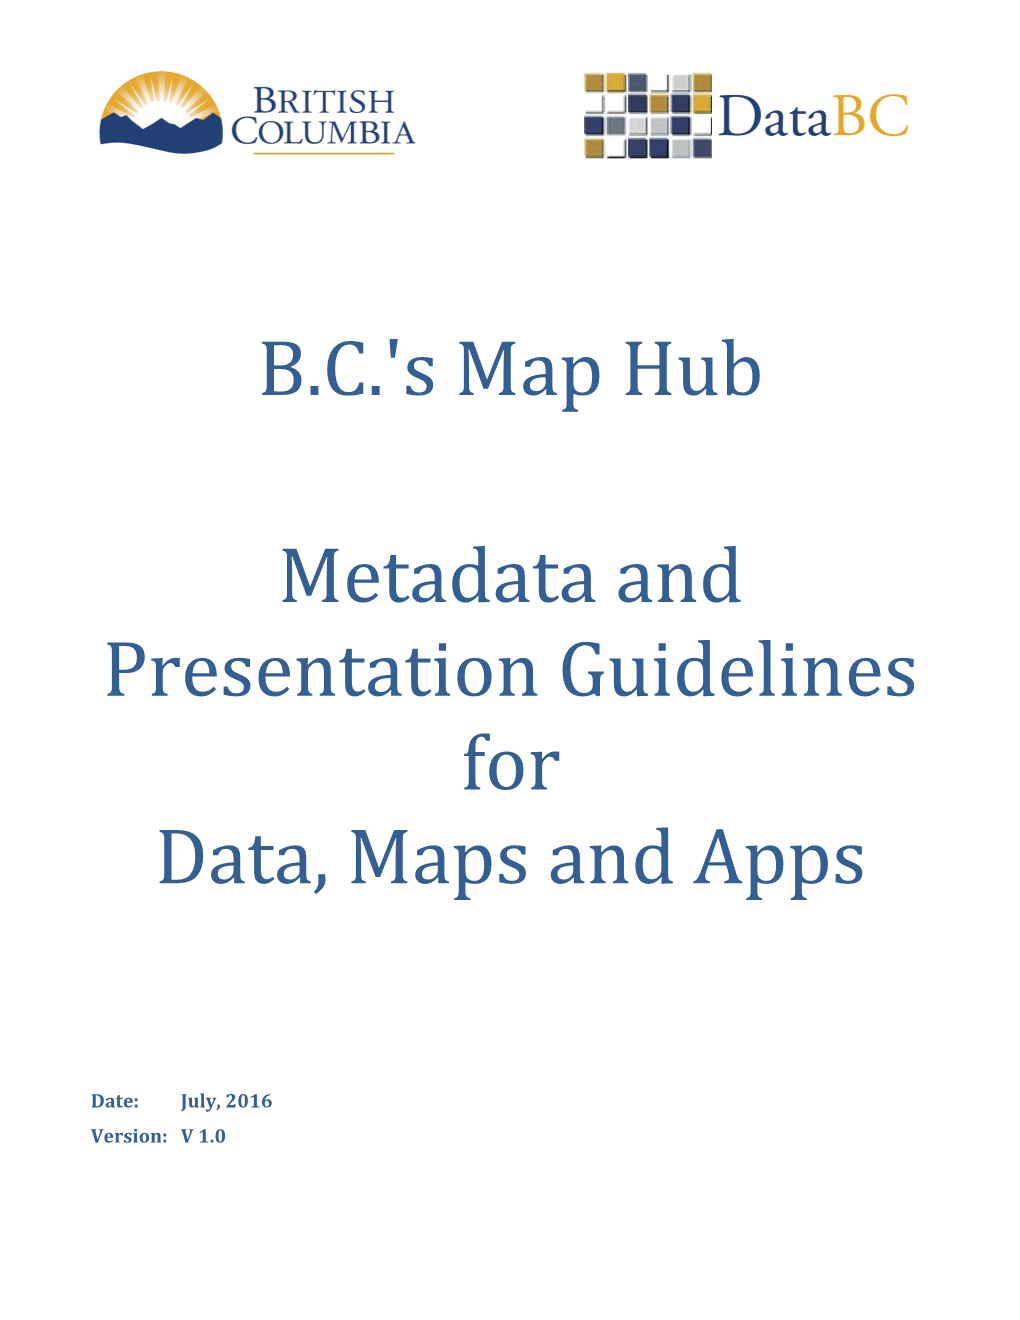 Metadata and Presentation Guidelines For